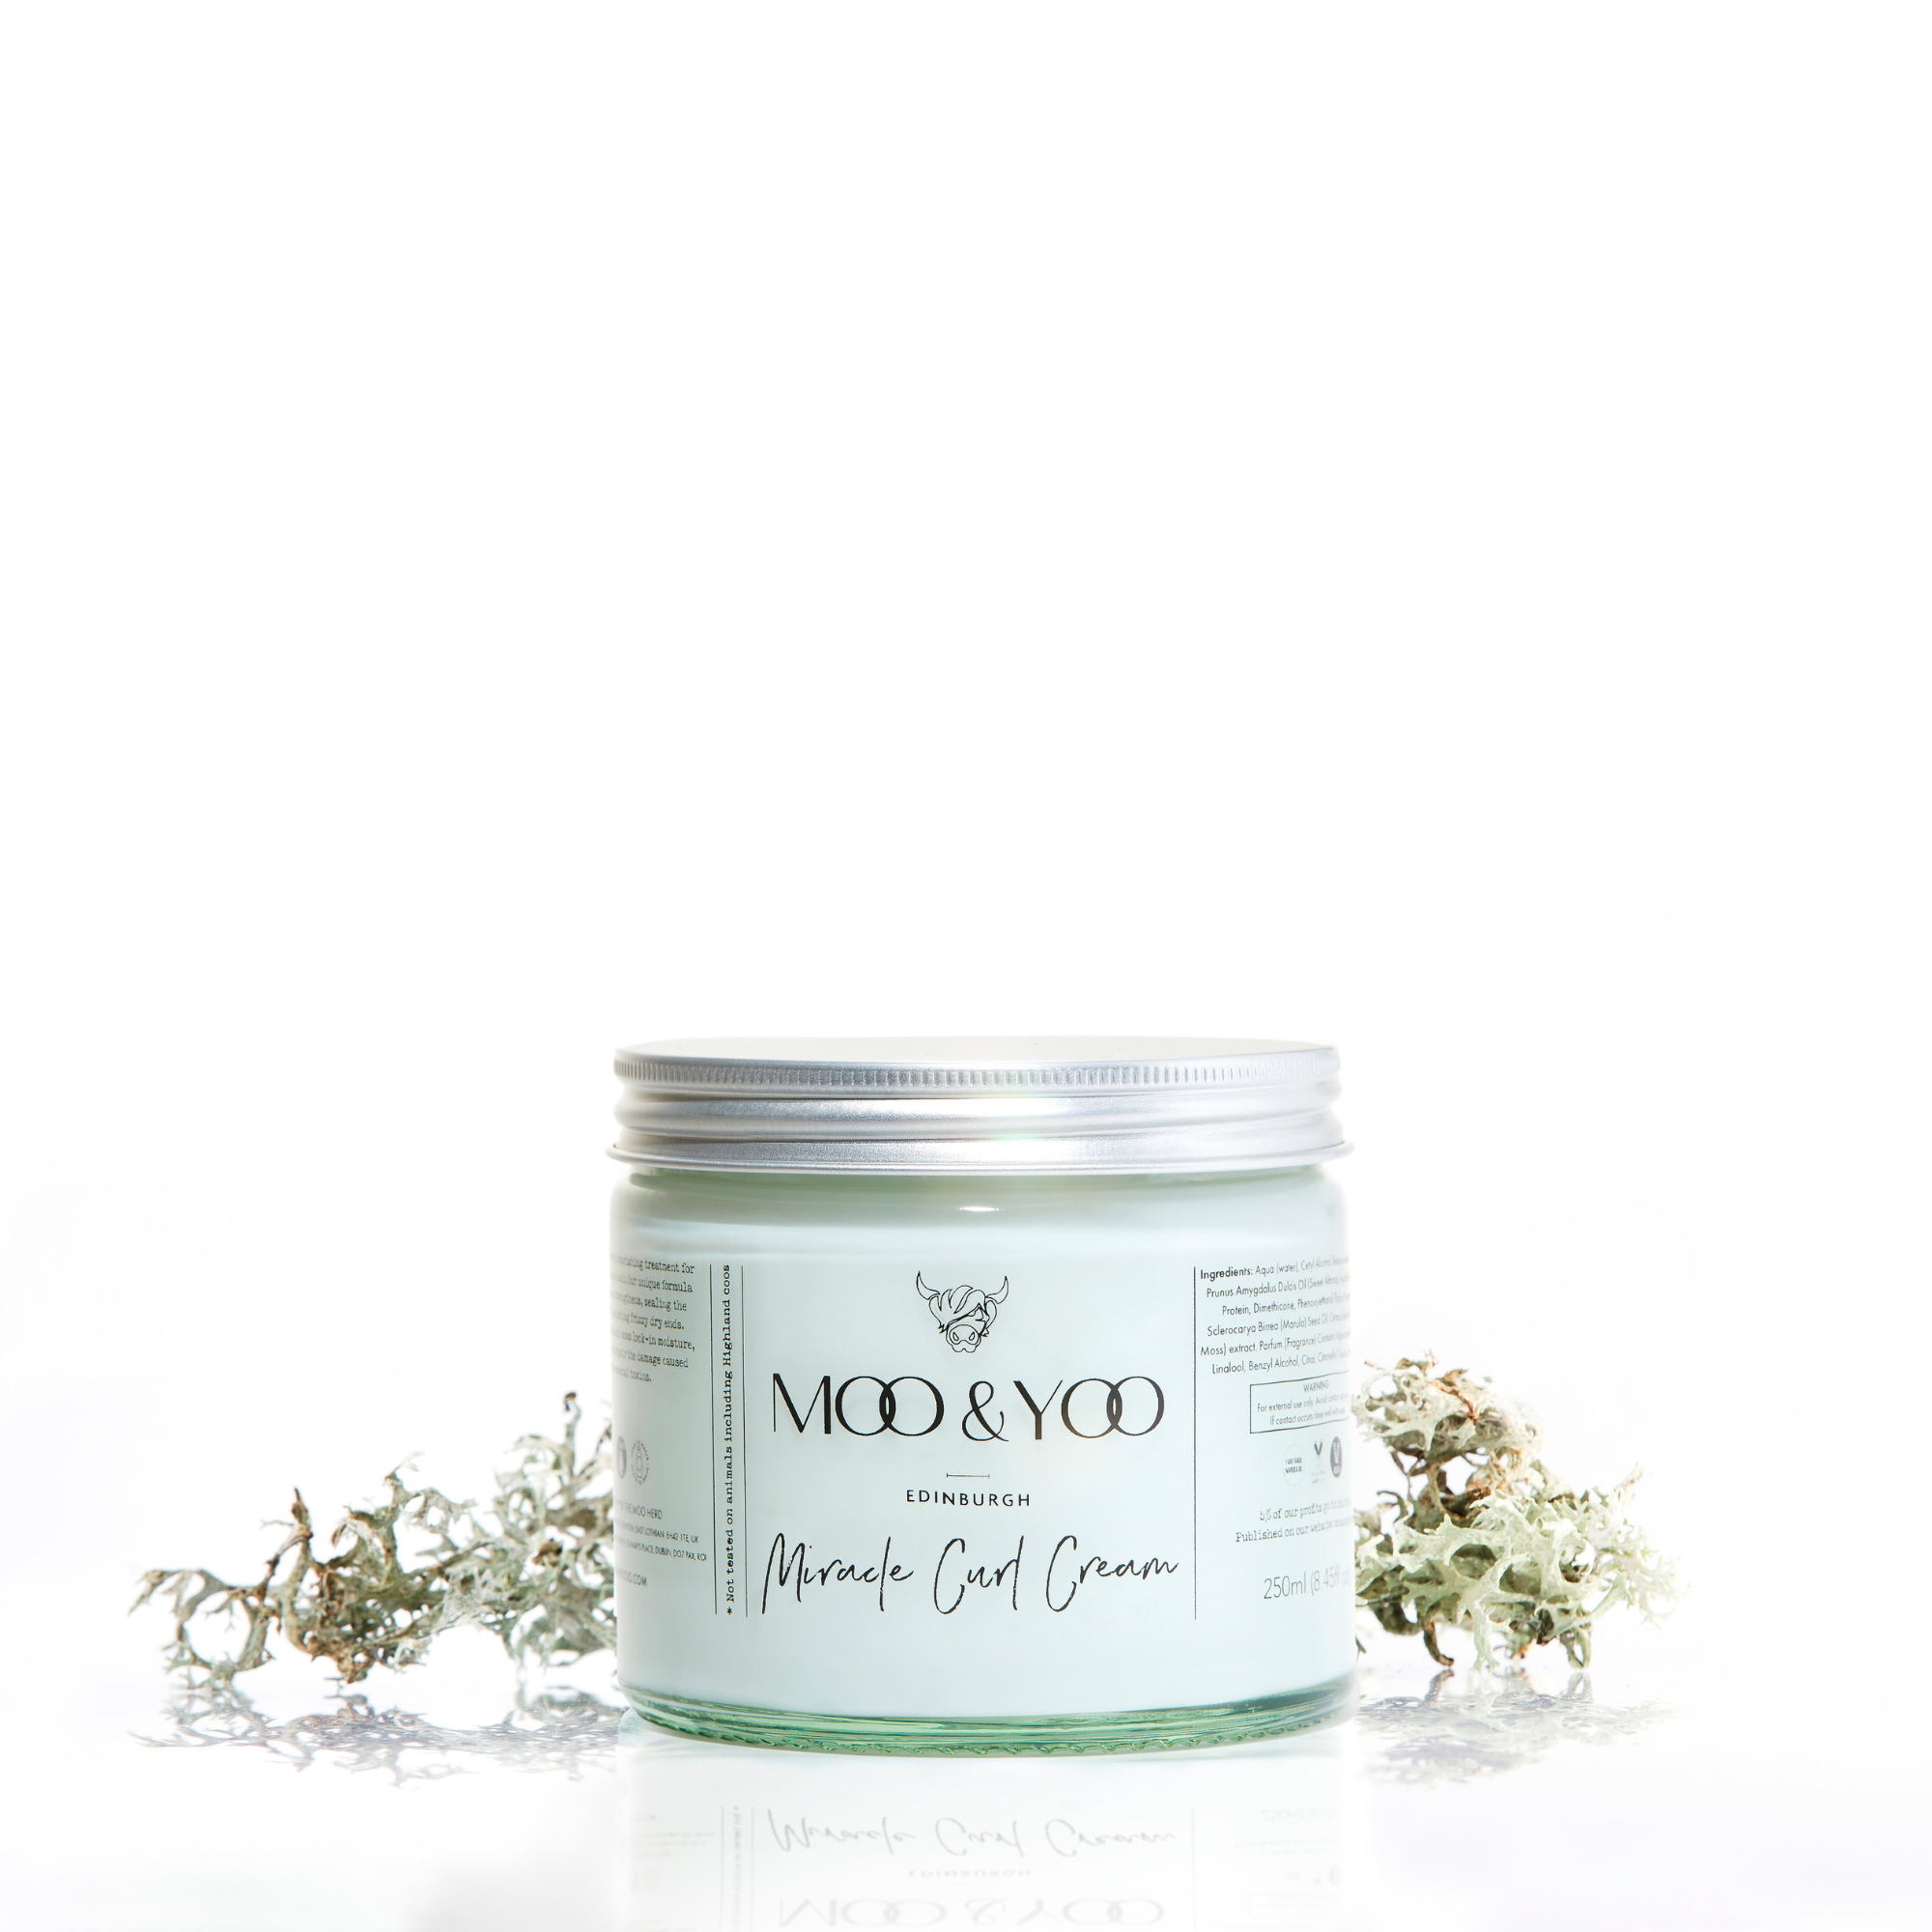 A glass jar of Moo and Yoo Miracle Curl Cream with an aluminium lid on a white background with a sprig of Icelandic moss placed to each side.